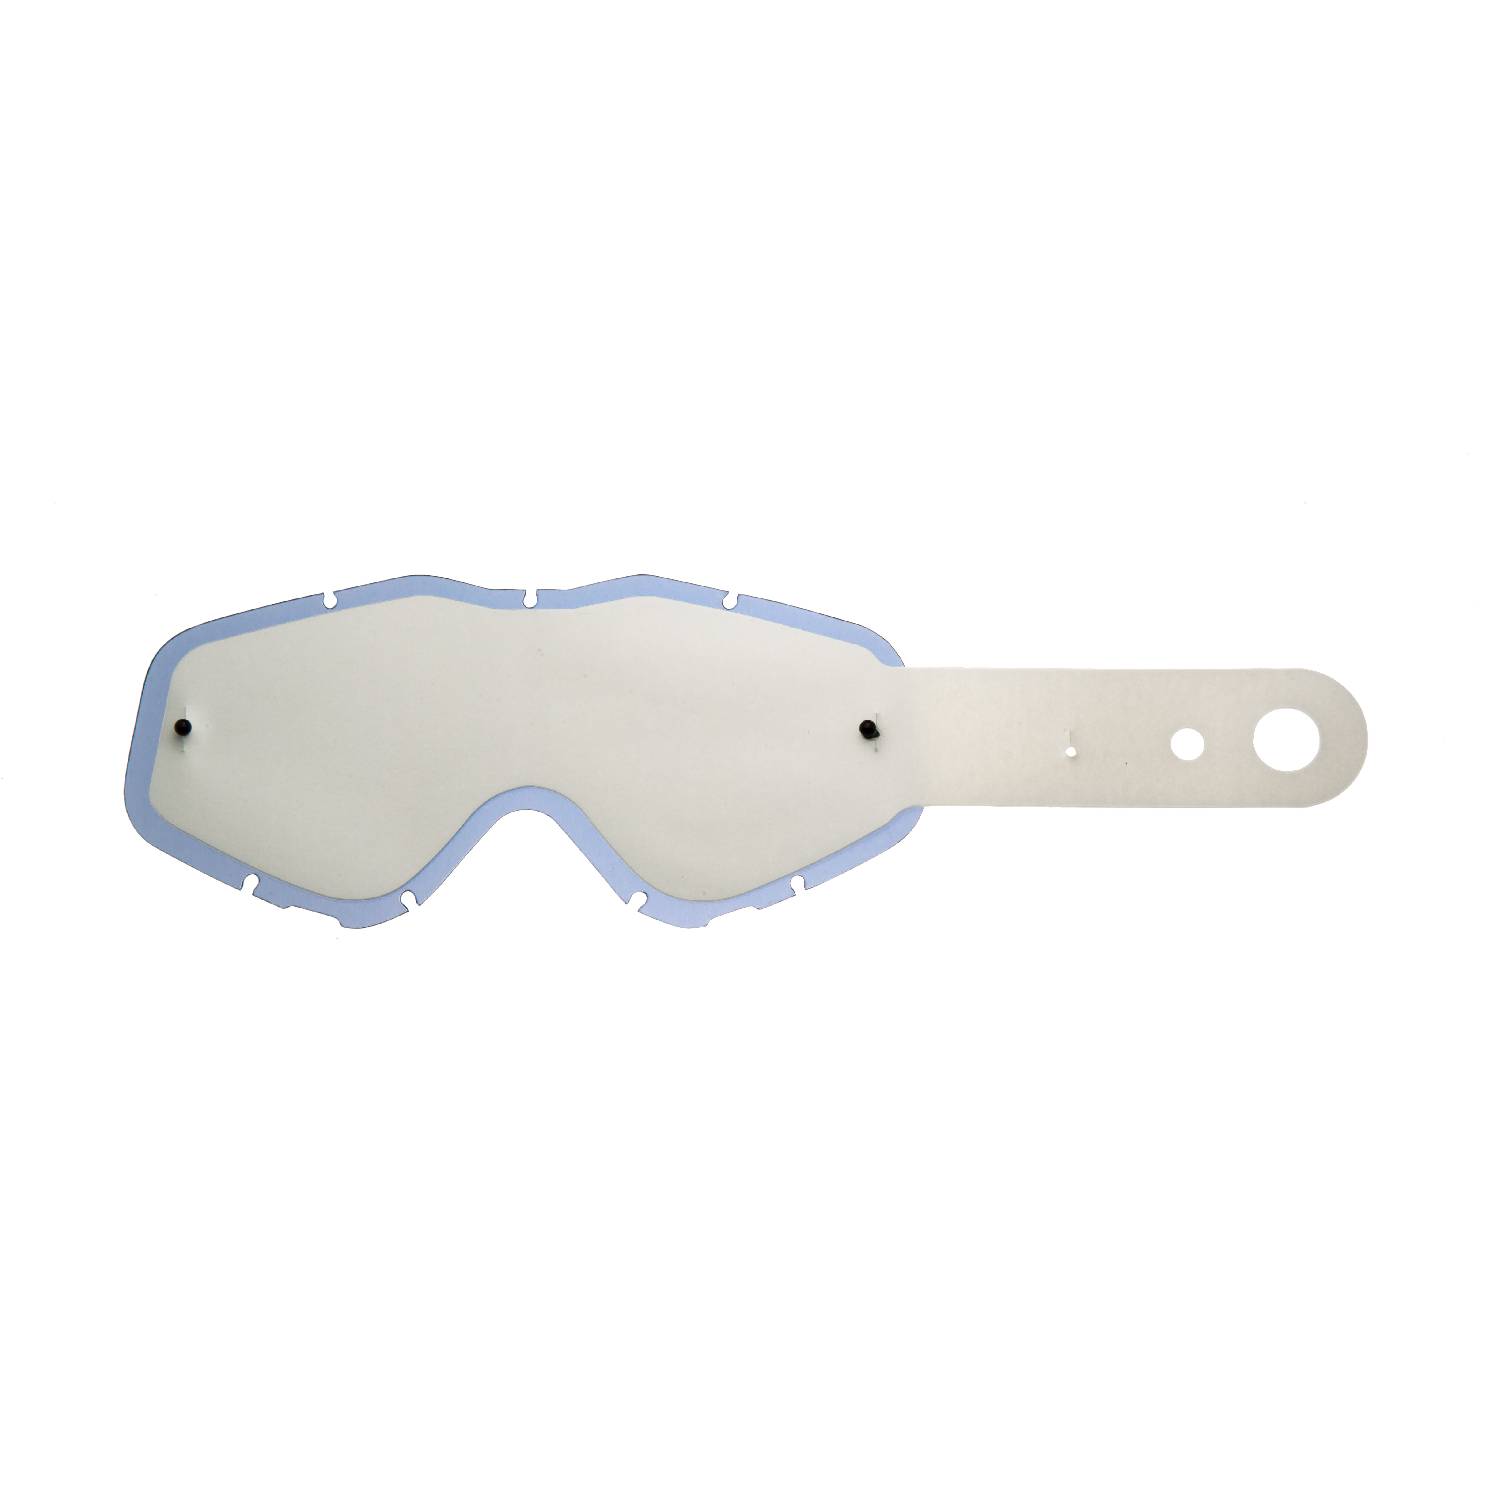 combo lenses with smokey lenses with 10 tear off compatible for Spy Klutch goggle